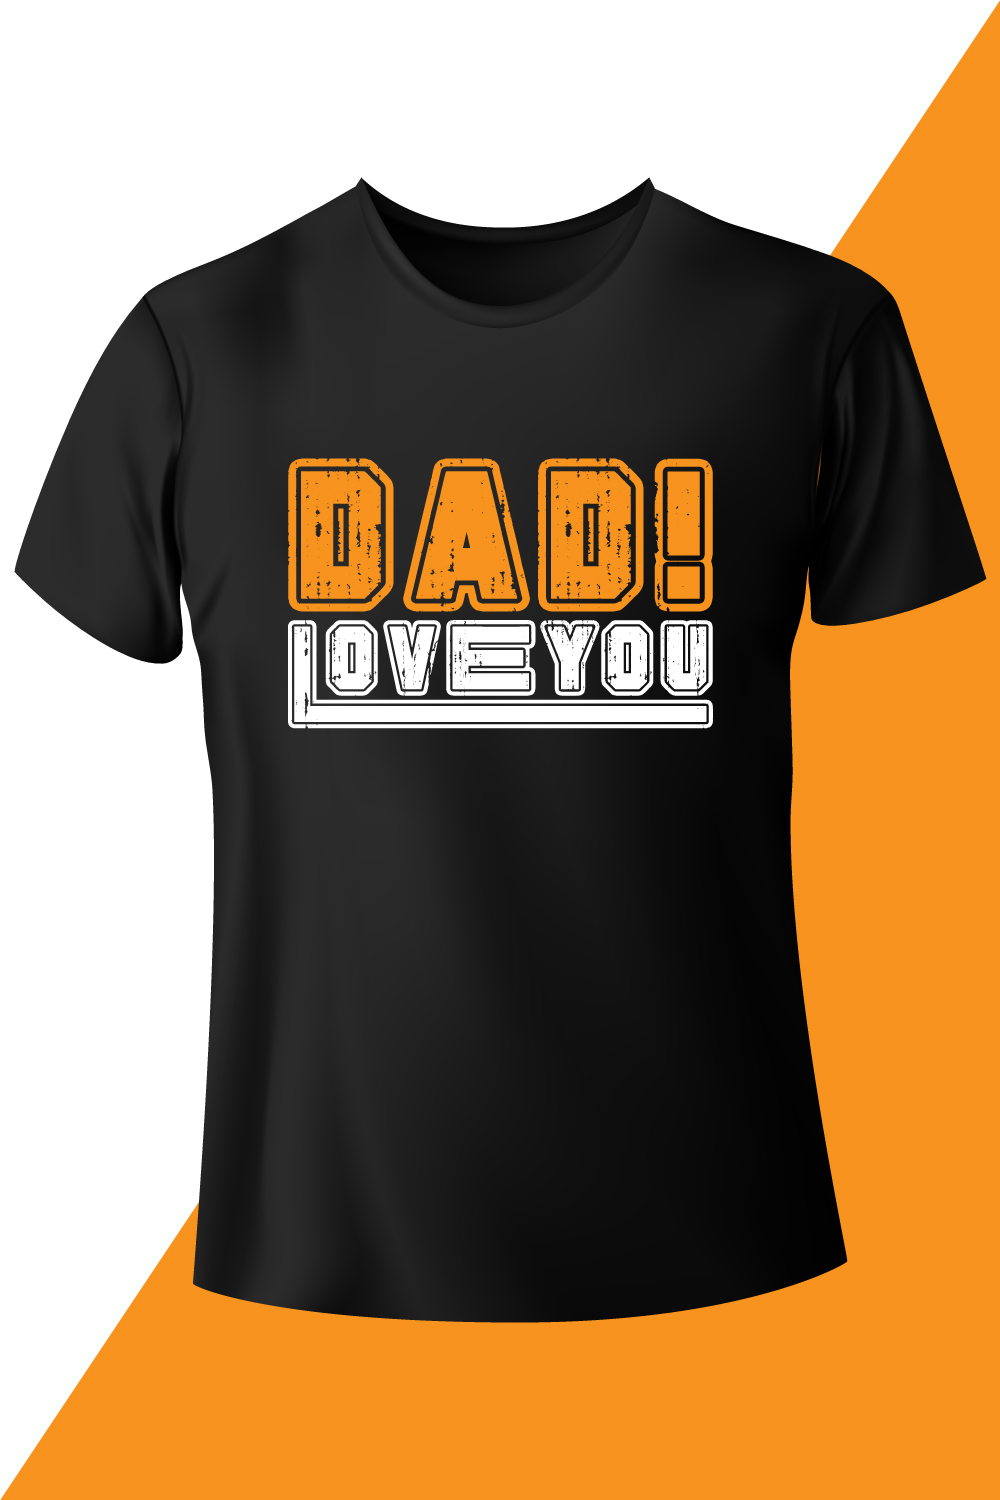 An image with a black t-shirt with a great slogan Dad i love you.